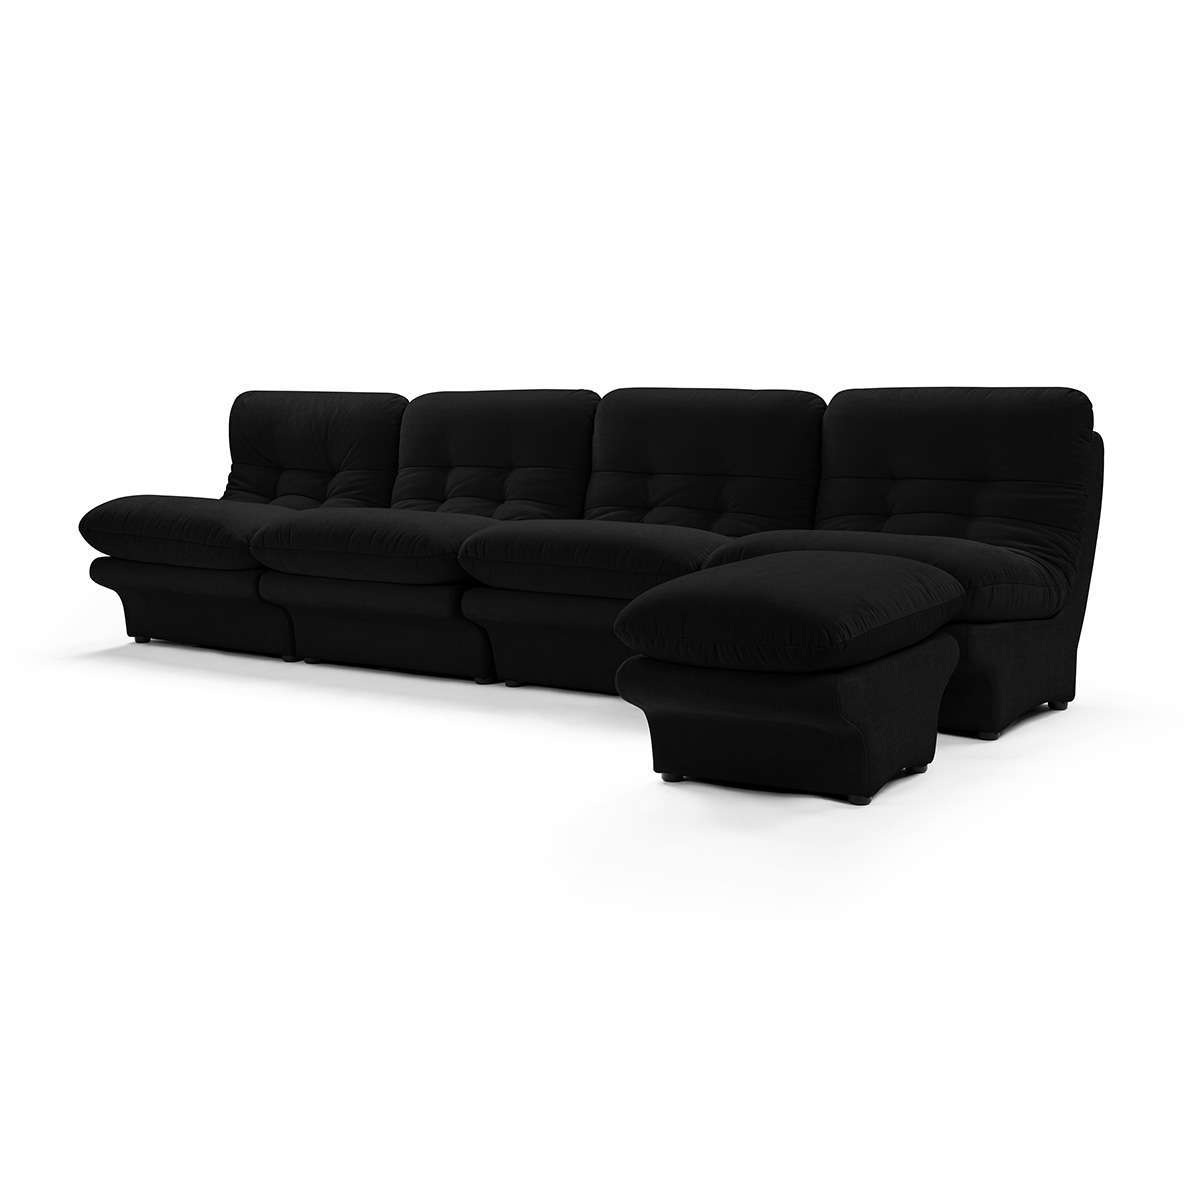 Carsons Mid Century Curved Modular Sectional Sofa / Combination 002 Chenille Helios-Jet Black